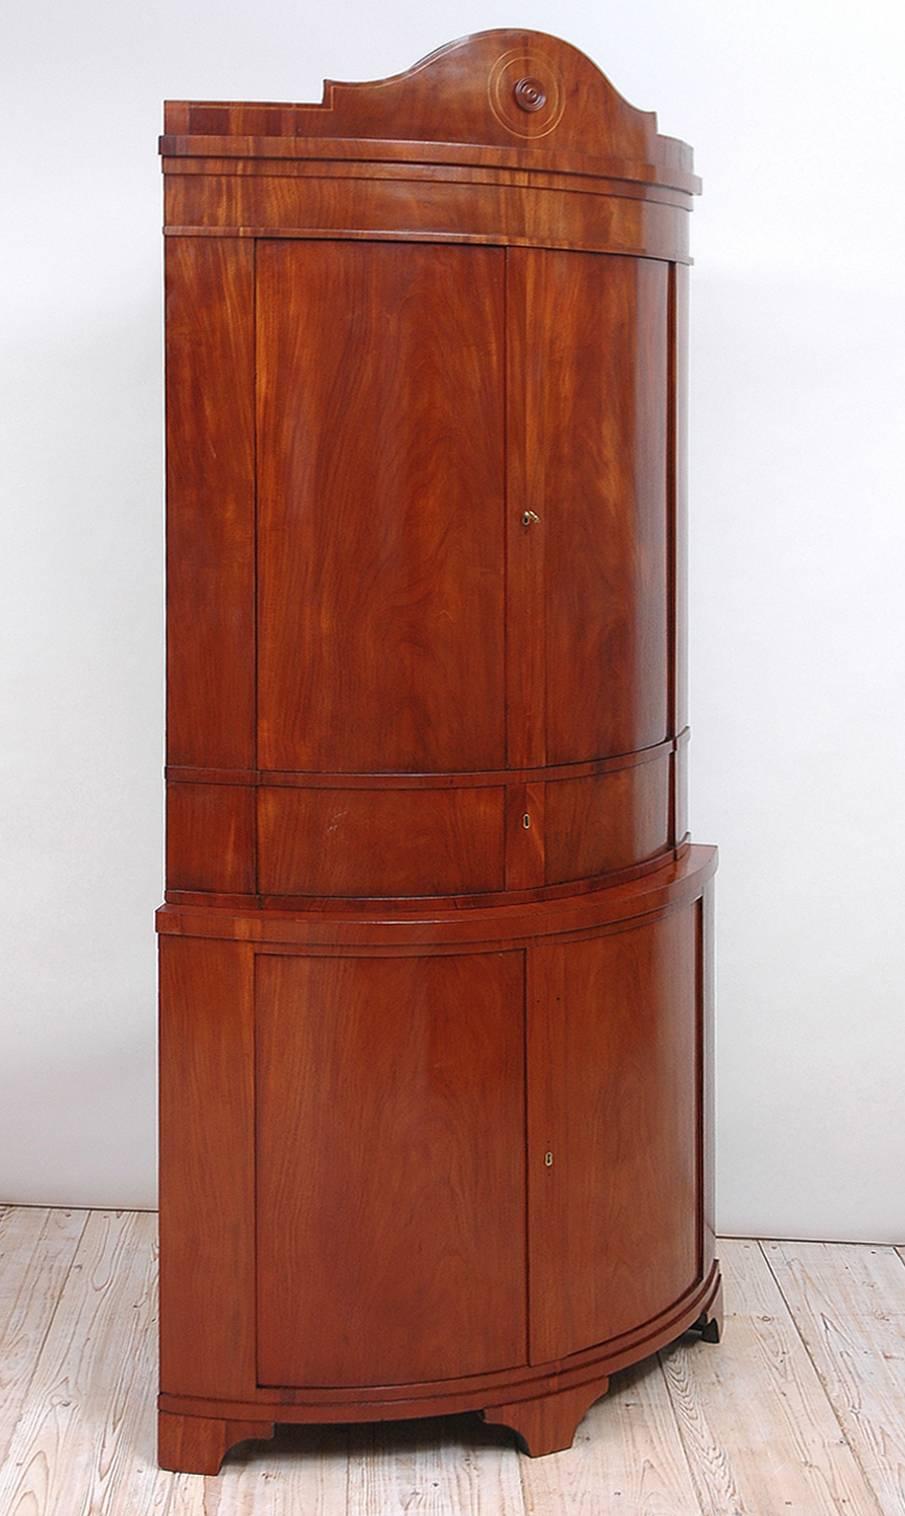 A large and very beautiful Karl Johan Empire corner cupboard in mahogany with tiara-shaped top banded with satinwood inlays and resting on bracket feet. Features a storage drawer midway between two sets of bowed-front doors that provide ample